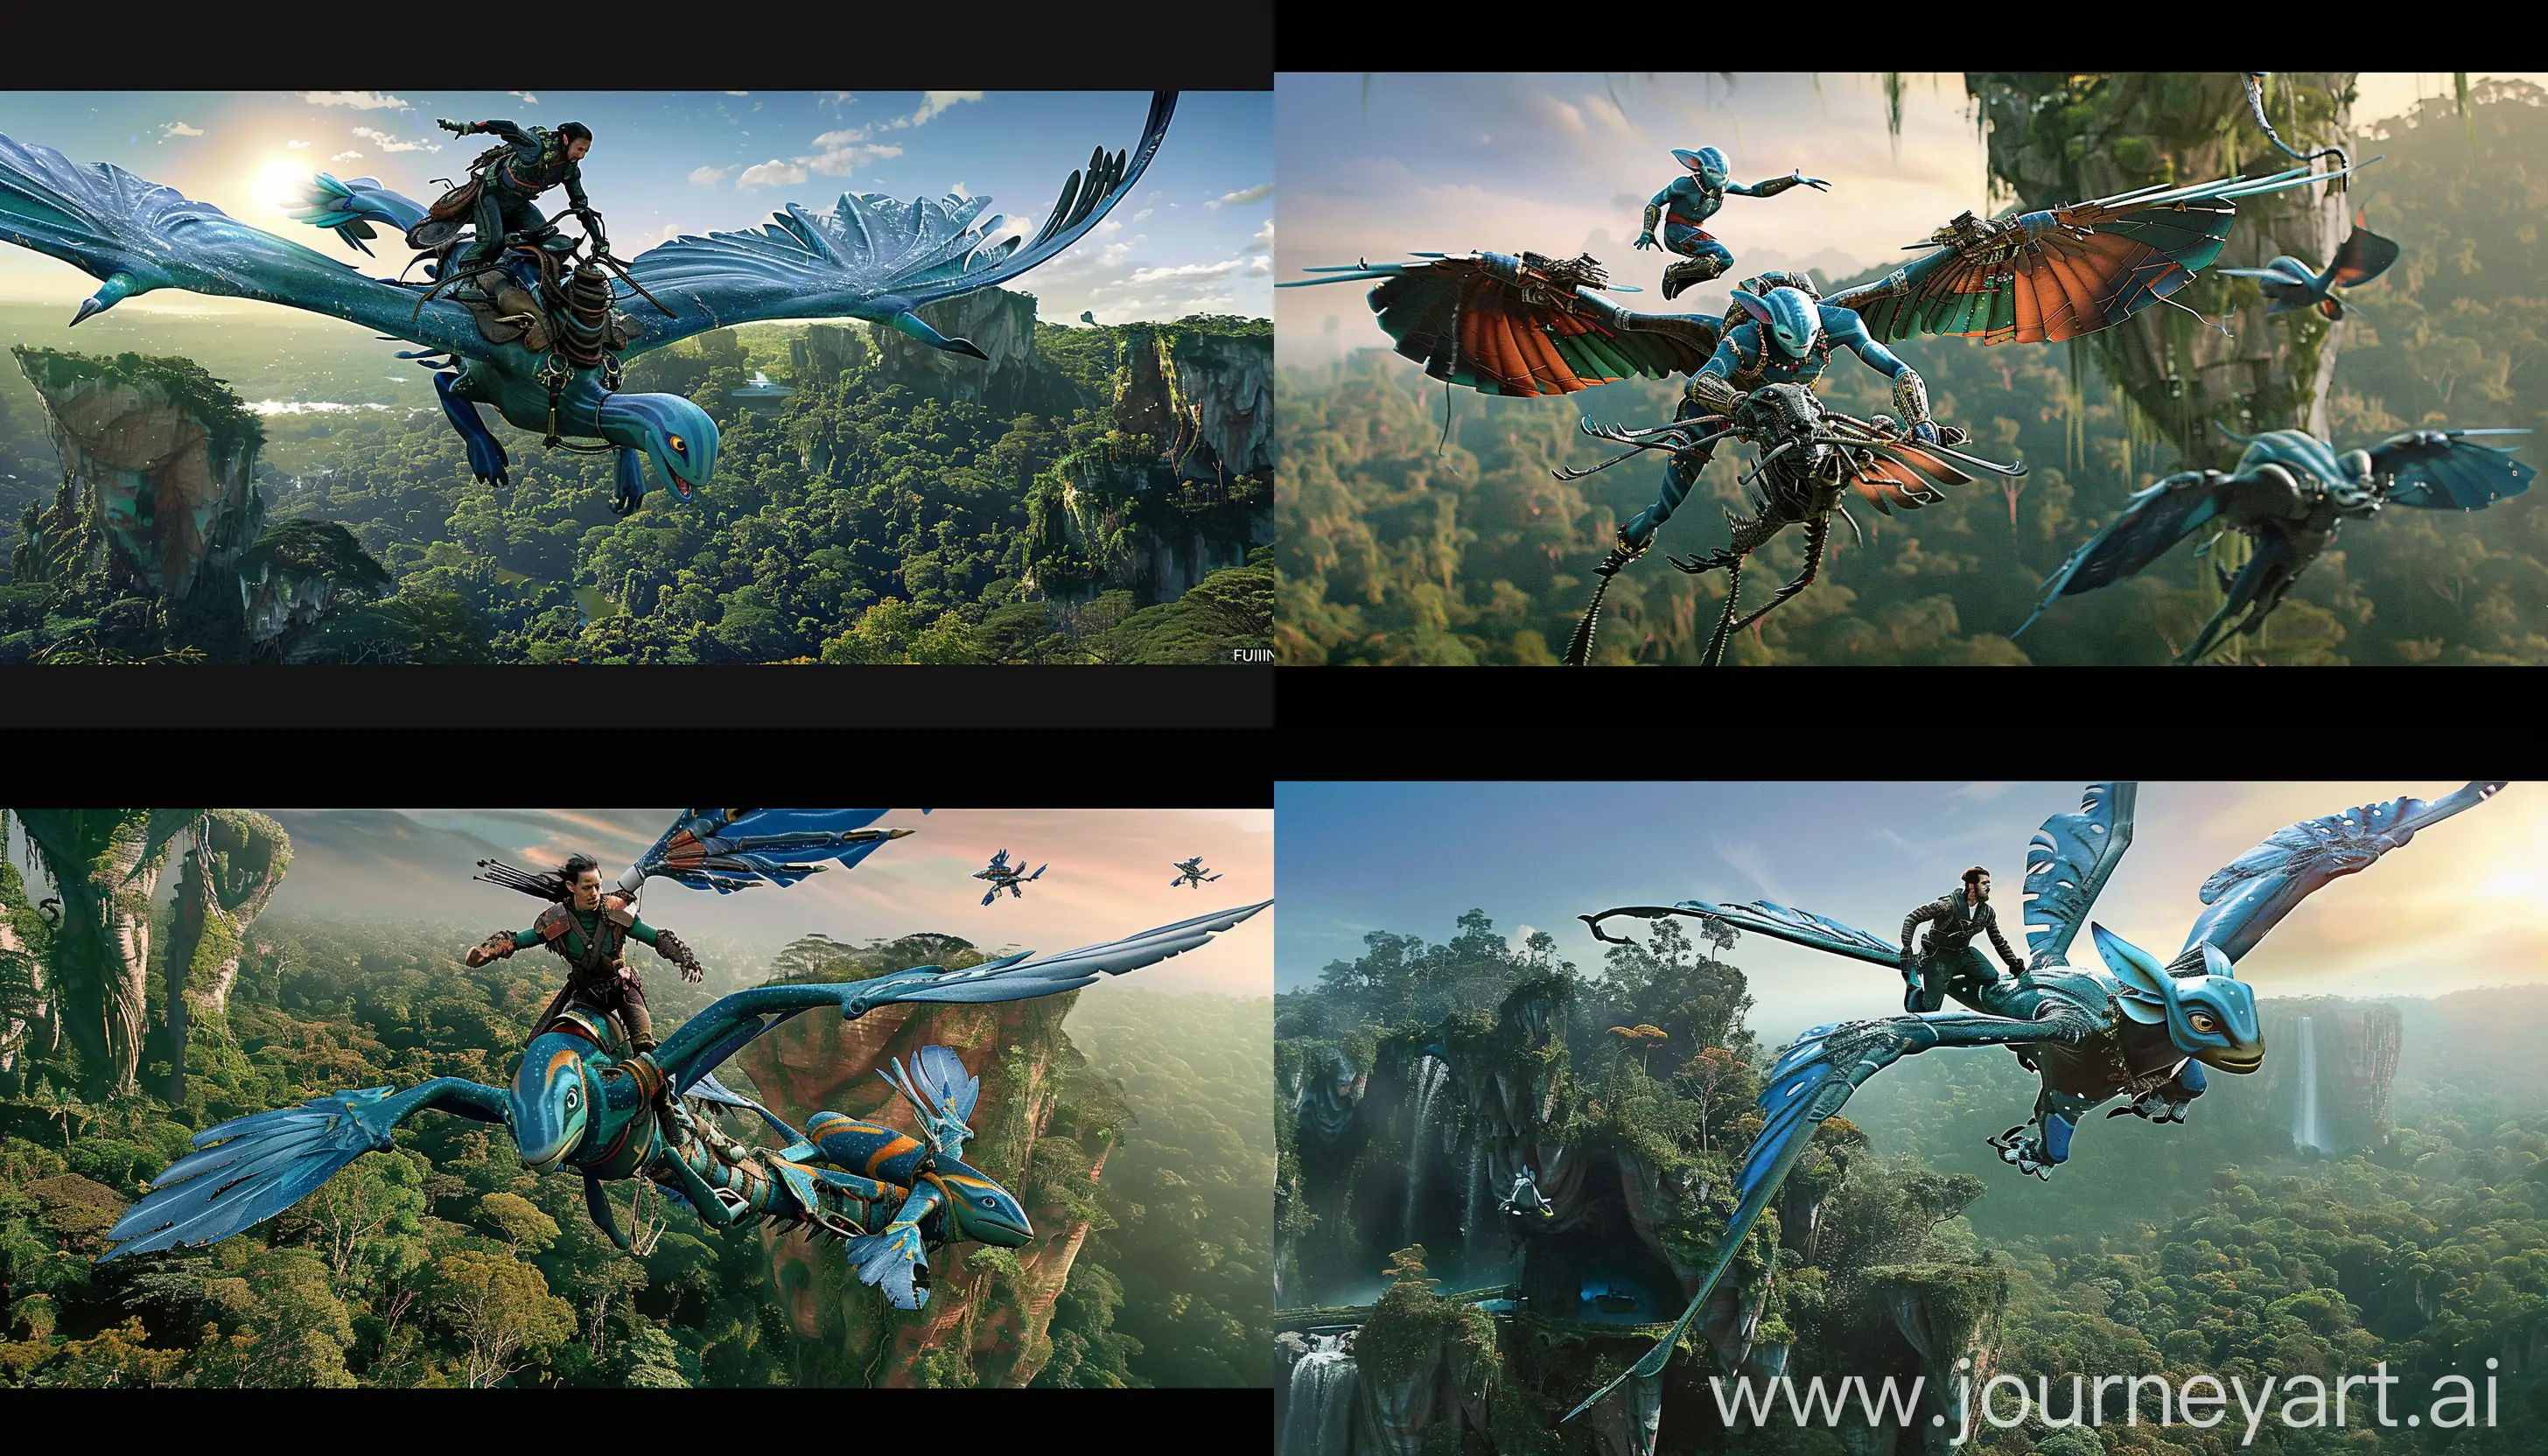 https://c4.wallpaperflare.com/wallpaper/562/135/739/jake-sully-neytiri-ikran-makto-seze-wallpaper-preview.jpg A cinematic drone’s view of Jake Sully from Avatar The Way of Water flying on top of a banshee over the Pandora forest, preserving the beauty of Pandora captured with Super35mm cameras but also the APS-C format in combination with the FUJINON lenses of the MK Cine Series. --style raw --ar 7:4